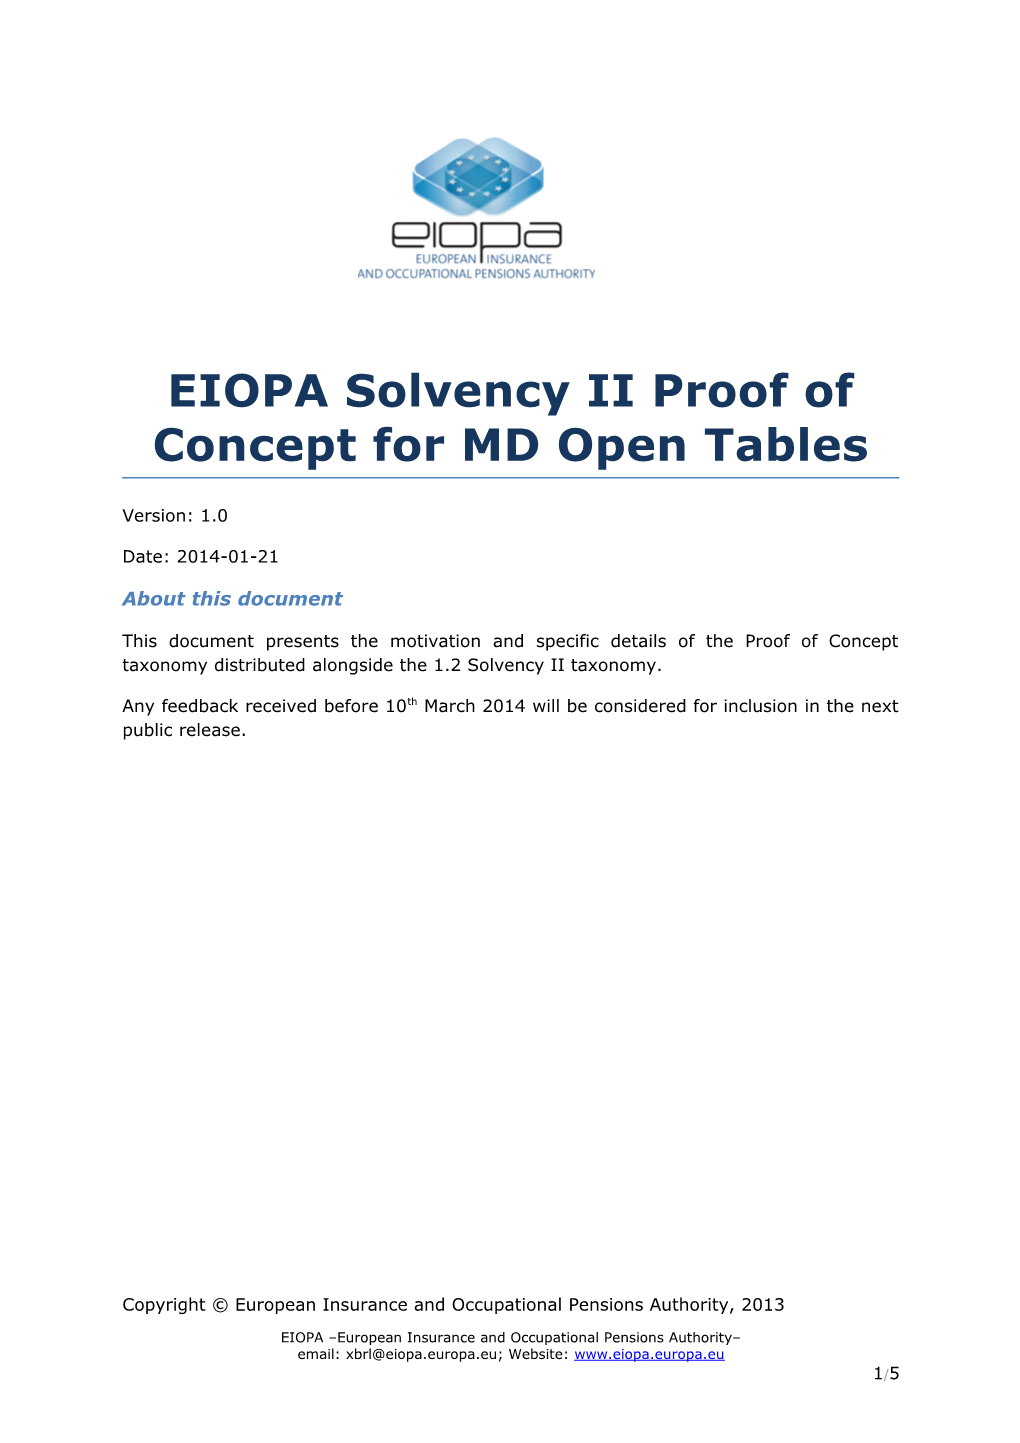 EIOPA Solvency II Proof of Concept for MD Open Tables